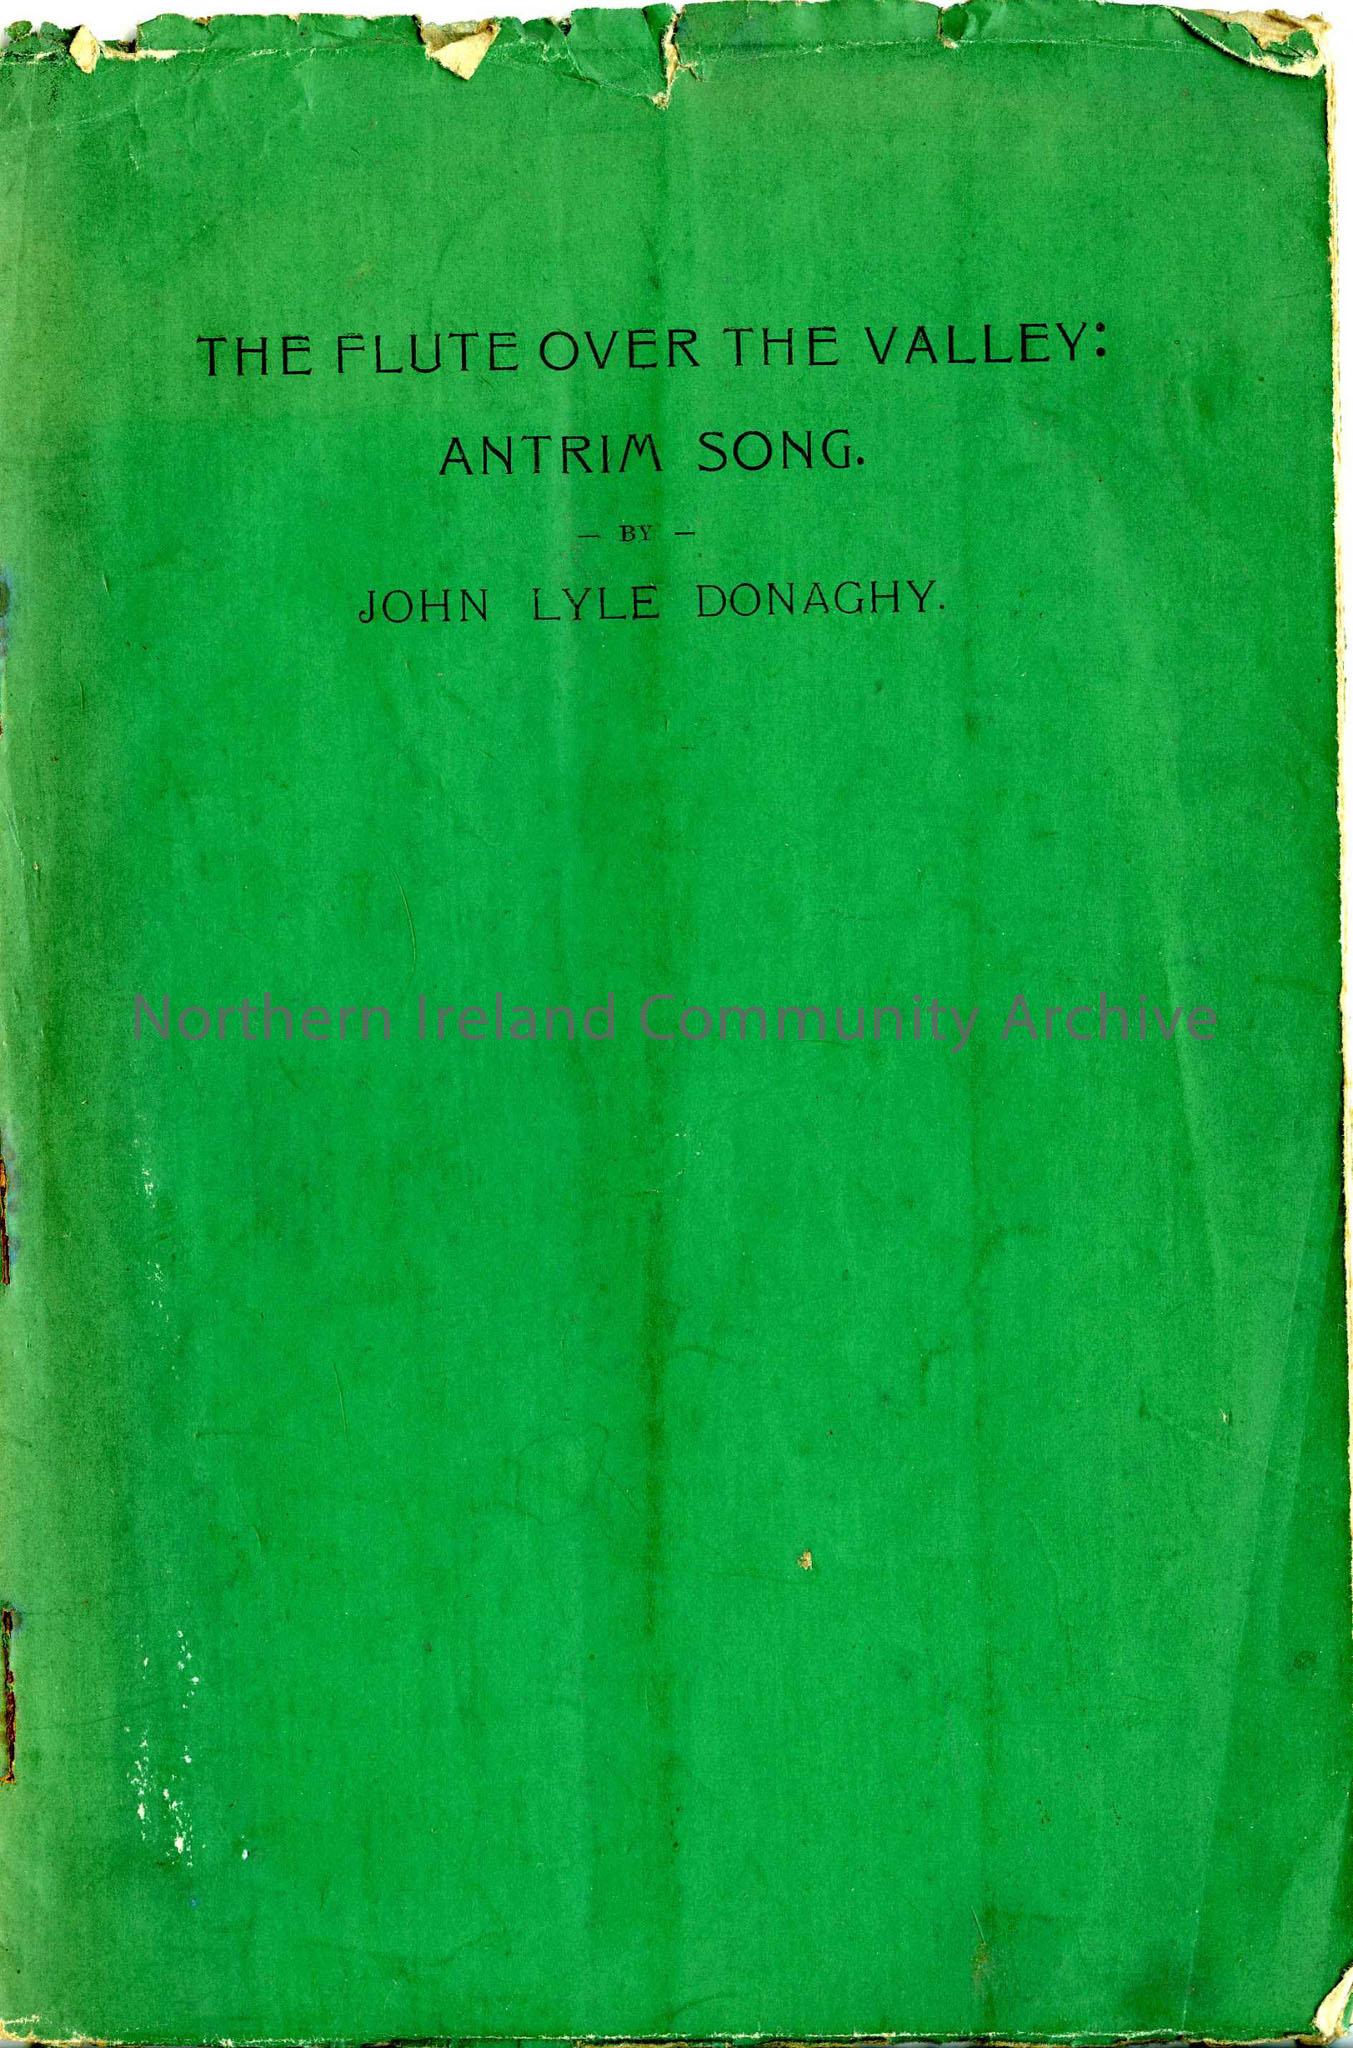 The Flute Over the Valley: Antrim Song